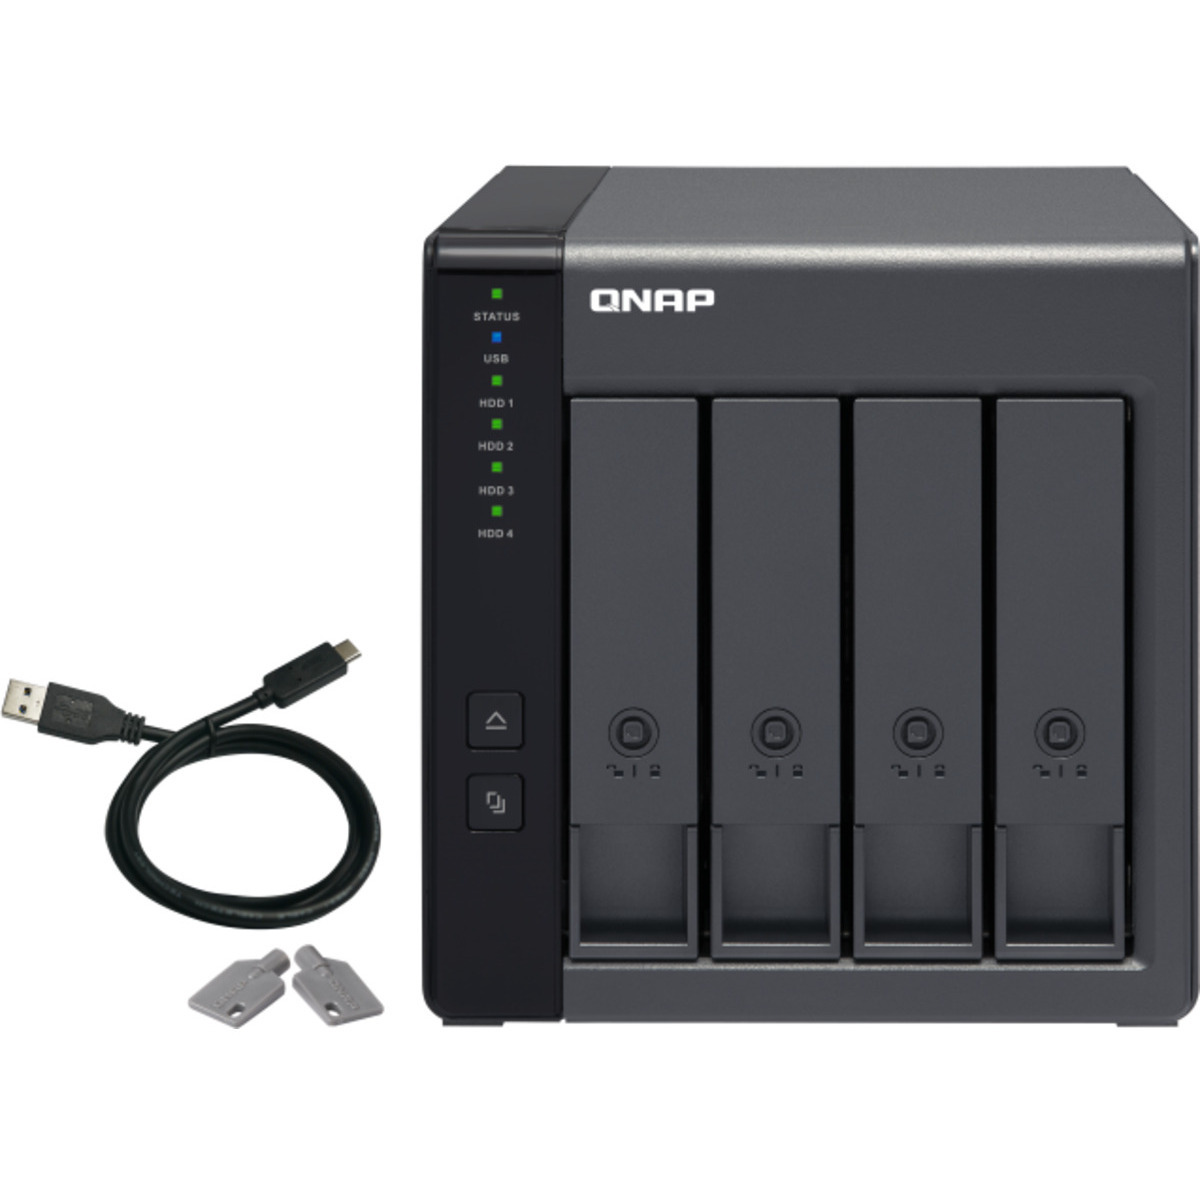 QNAP TR-004 External Expansion Drive 1.5tb 4-Bay Desktop Multimedia / Power User / Business Expansion Enclosure 3x500gb Samsung 870 EVO MZ-77E500BAM 2.5 560/530MB/s SATA 6Gb/s SSD CONSUMER Class Drives Installed - Burn-In Tested TR-004 External Expansion Drive